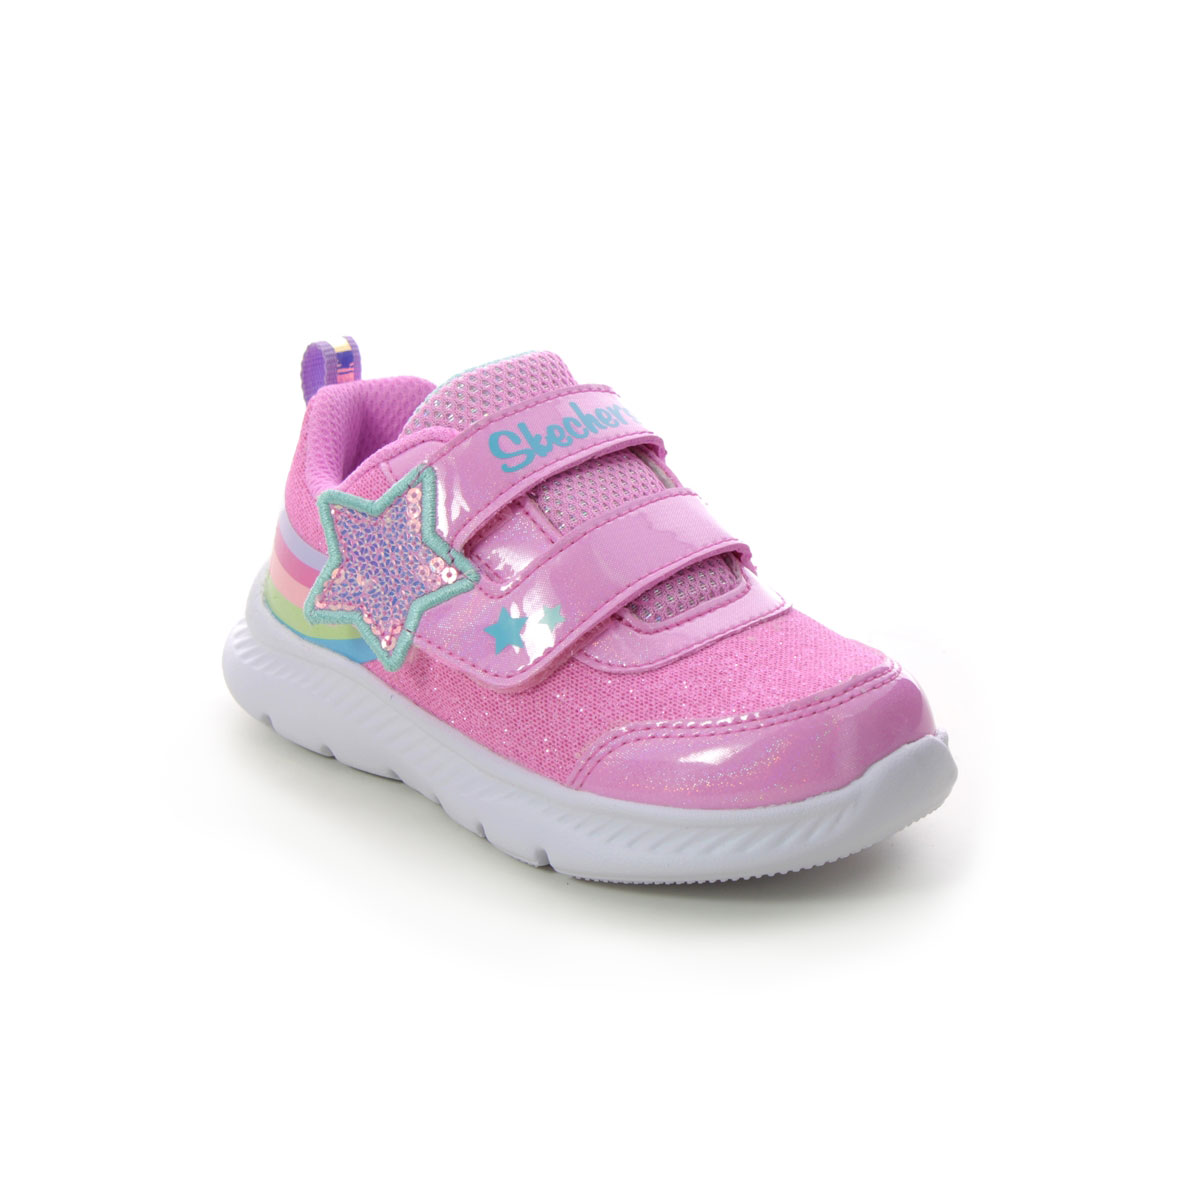 Skechers Comfy Flex Velcro Pink Kids Girls Trainers 302711N In Size 25 In Plain Pink For kids